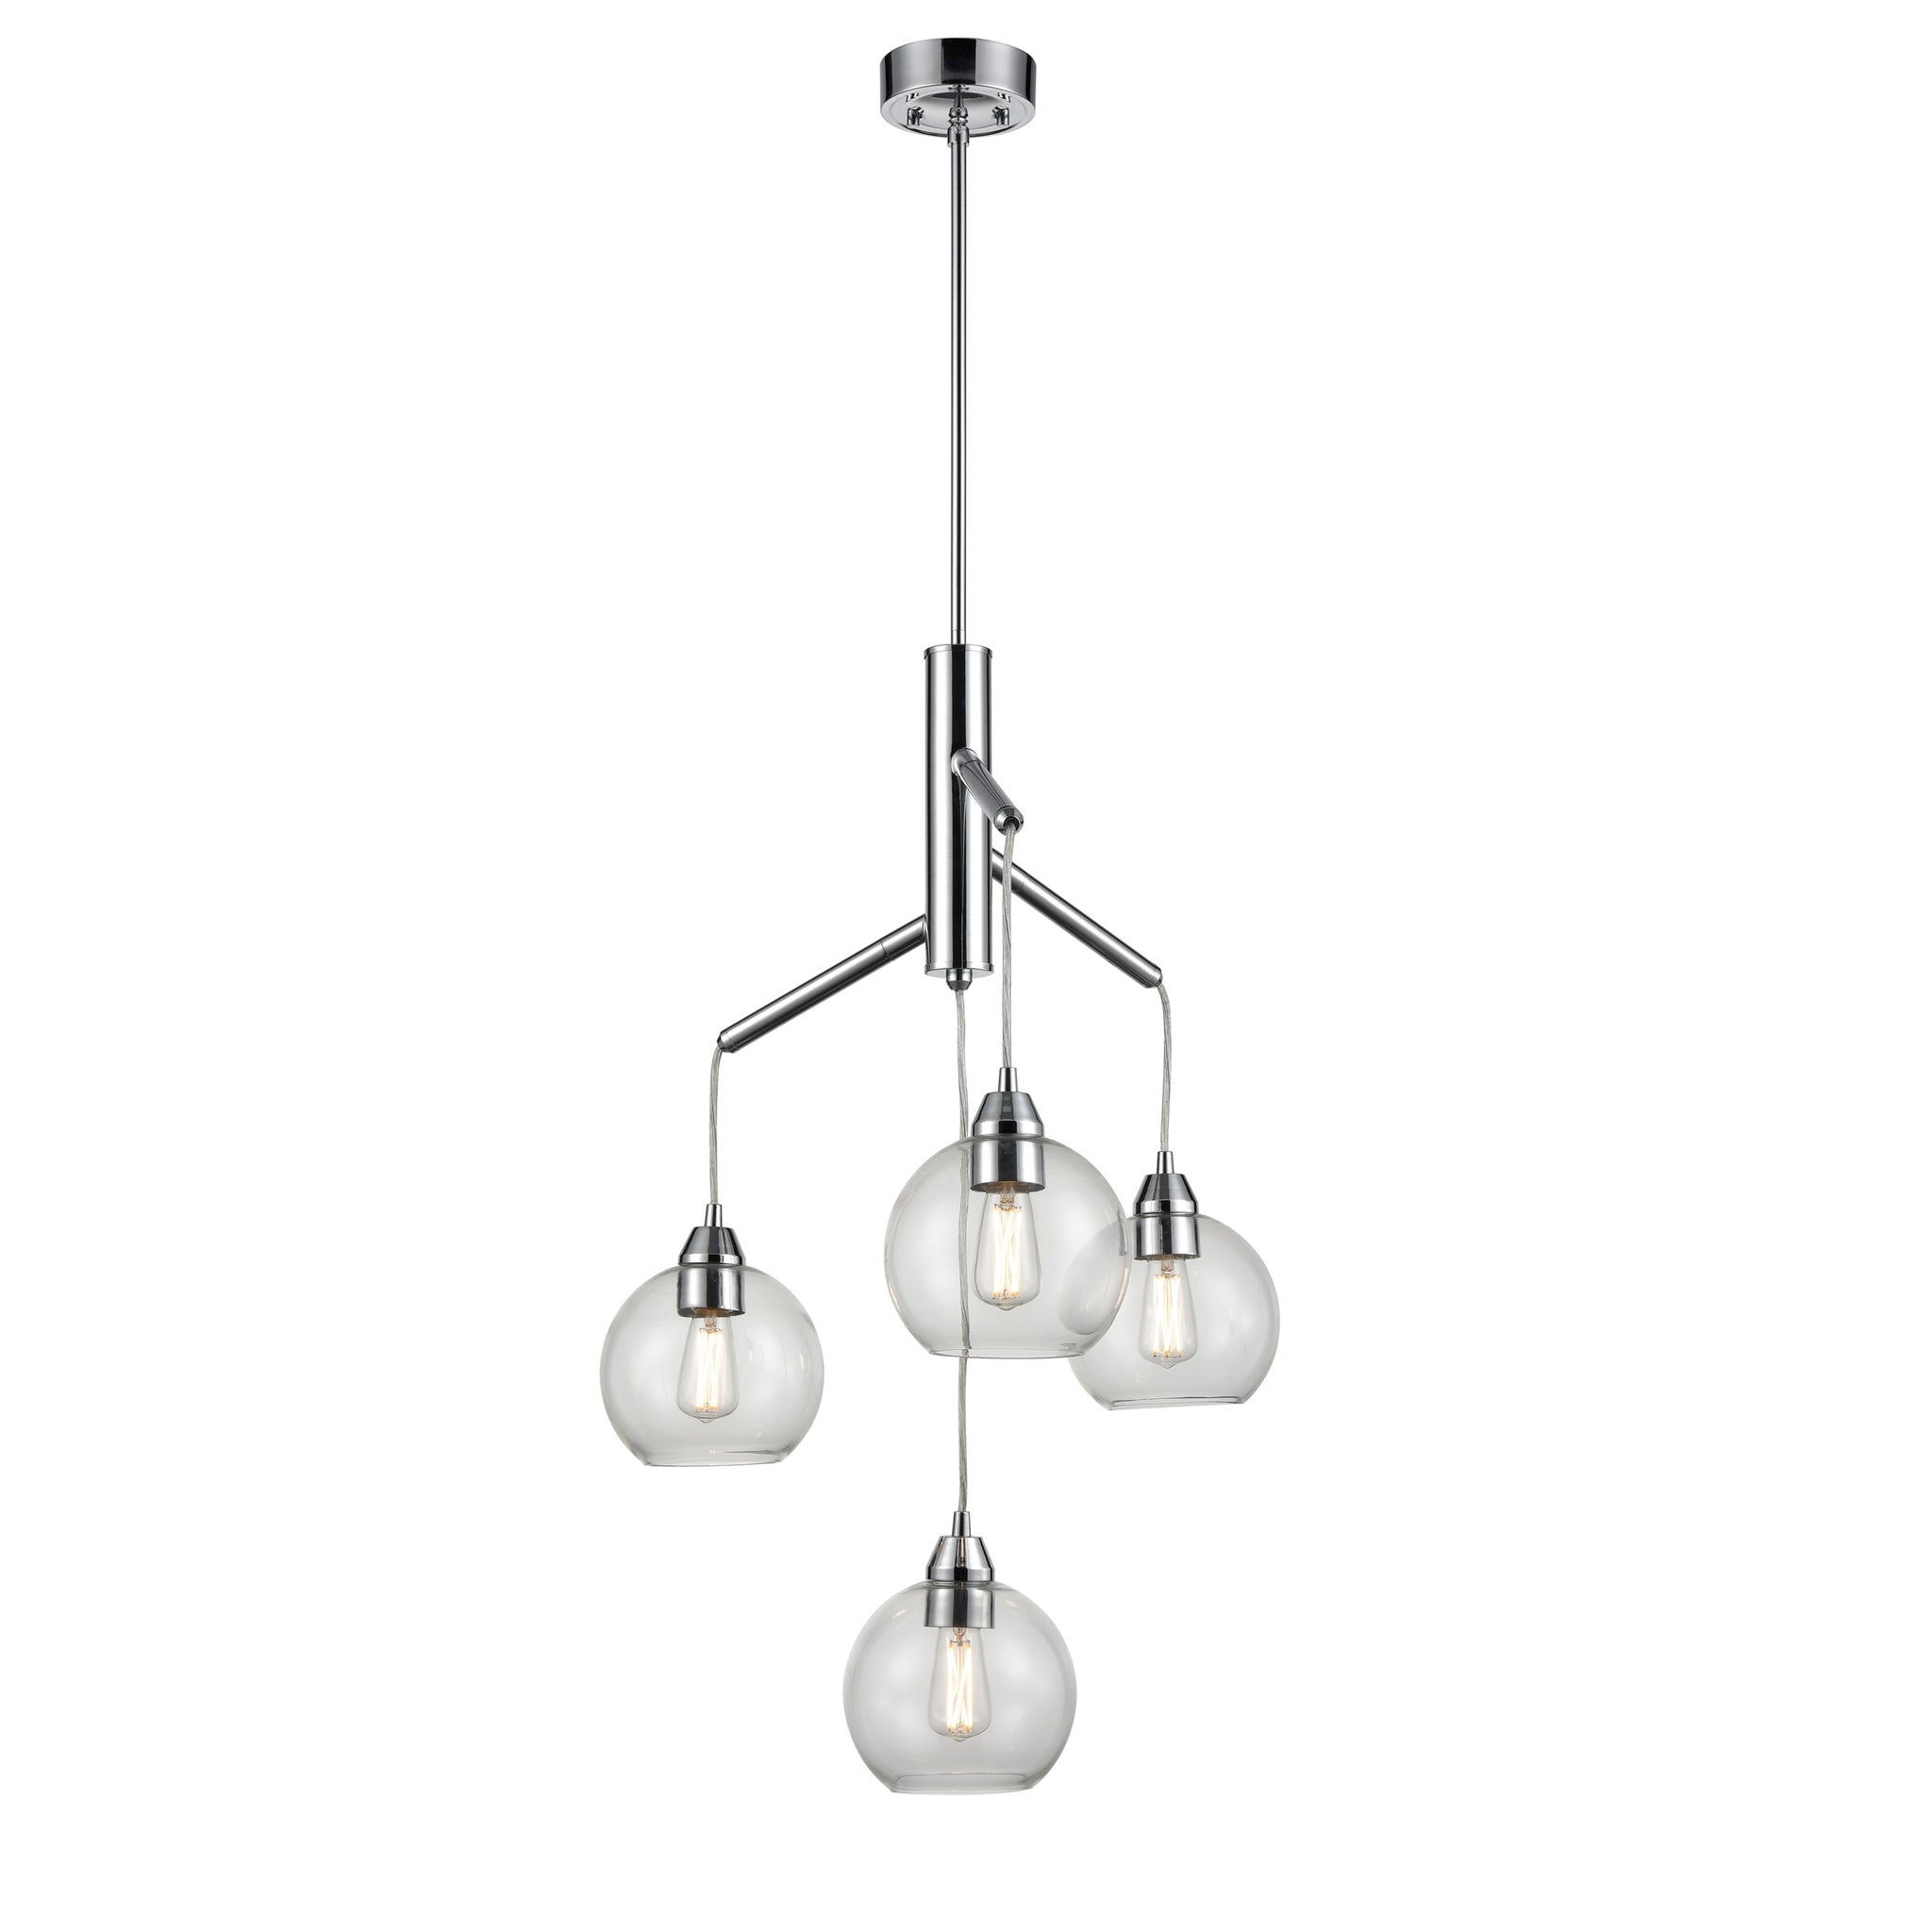 Andromeda Chandelier Chrome with Clear Glass